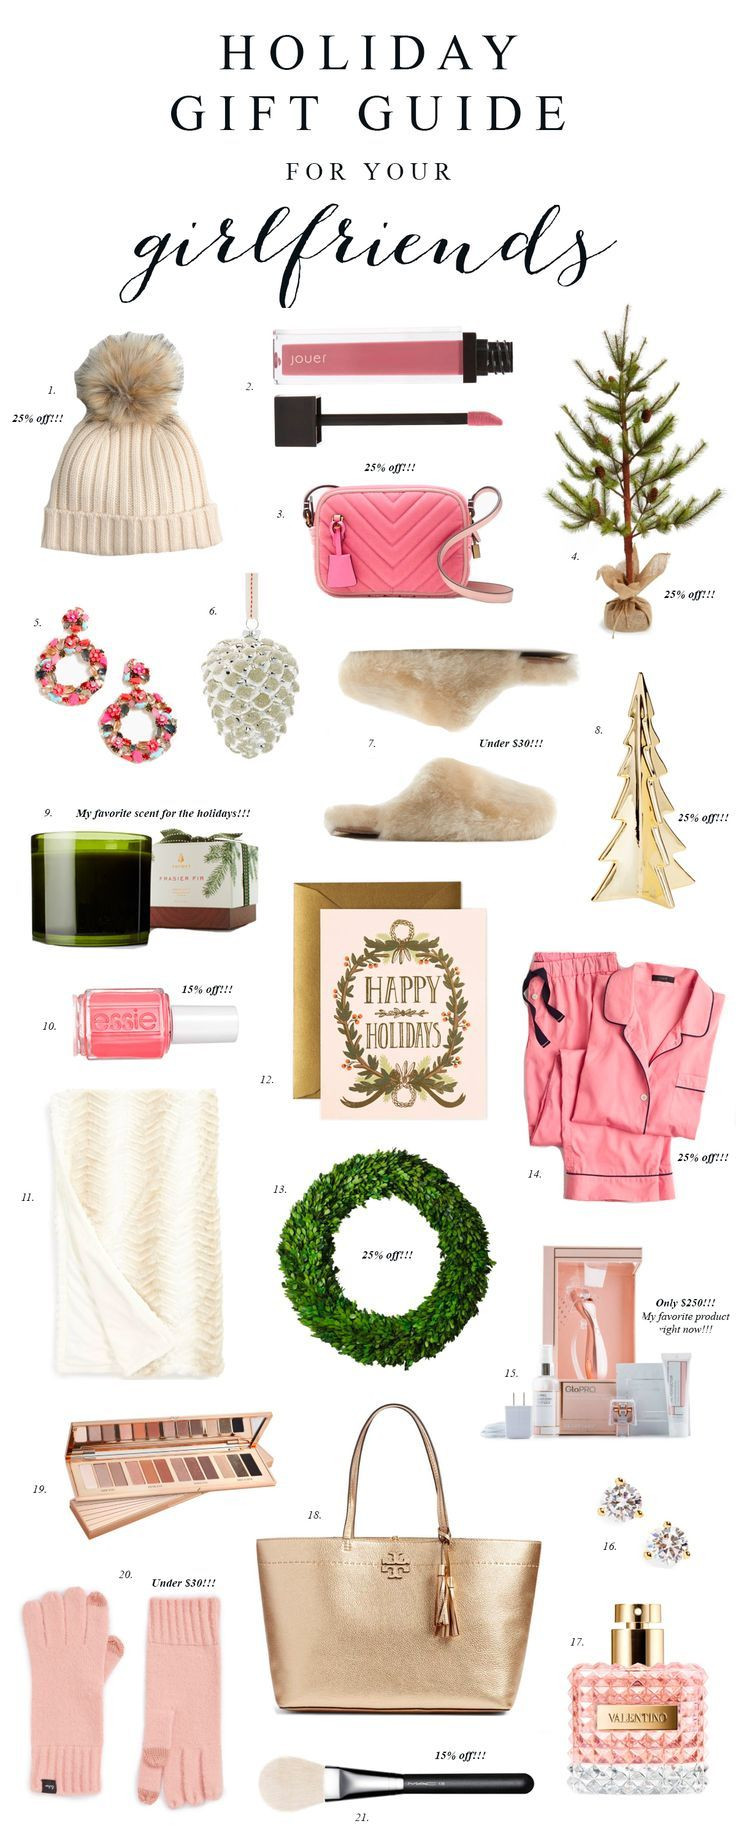 Unique Gift Ideas Girlfriend
 Gift Guide For Your Girlfriends